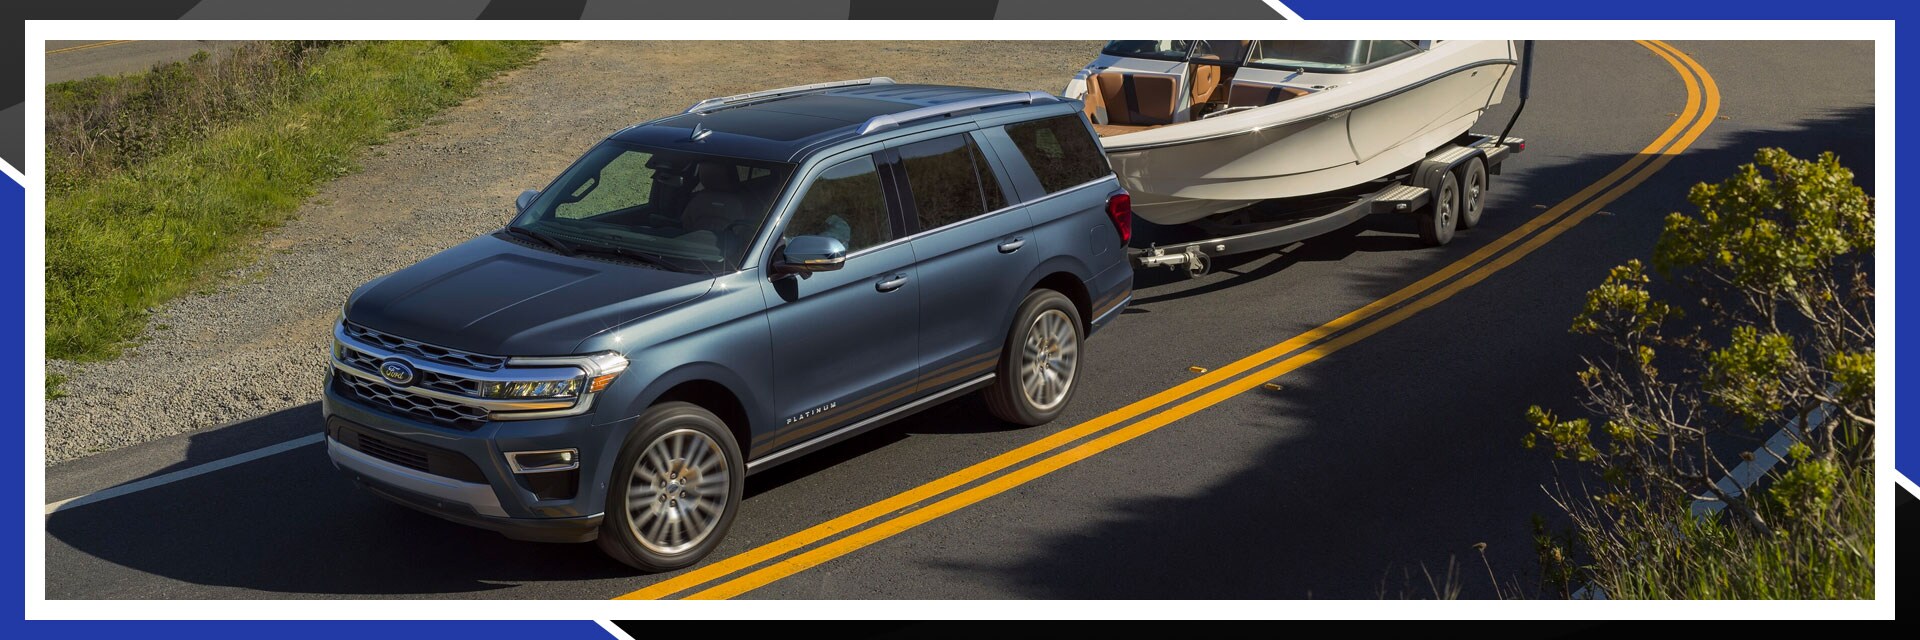 2023 Ford Expedition Towing Capacity